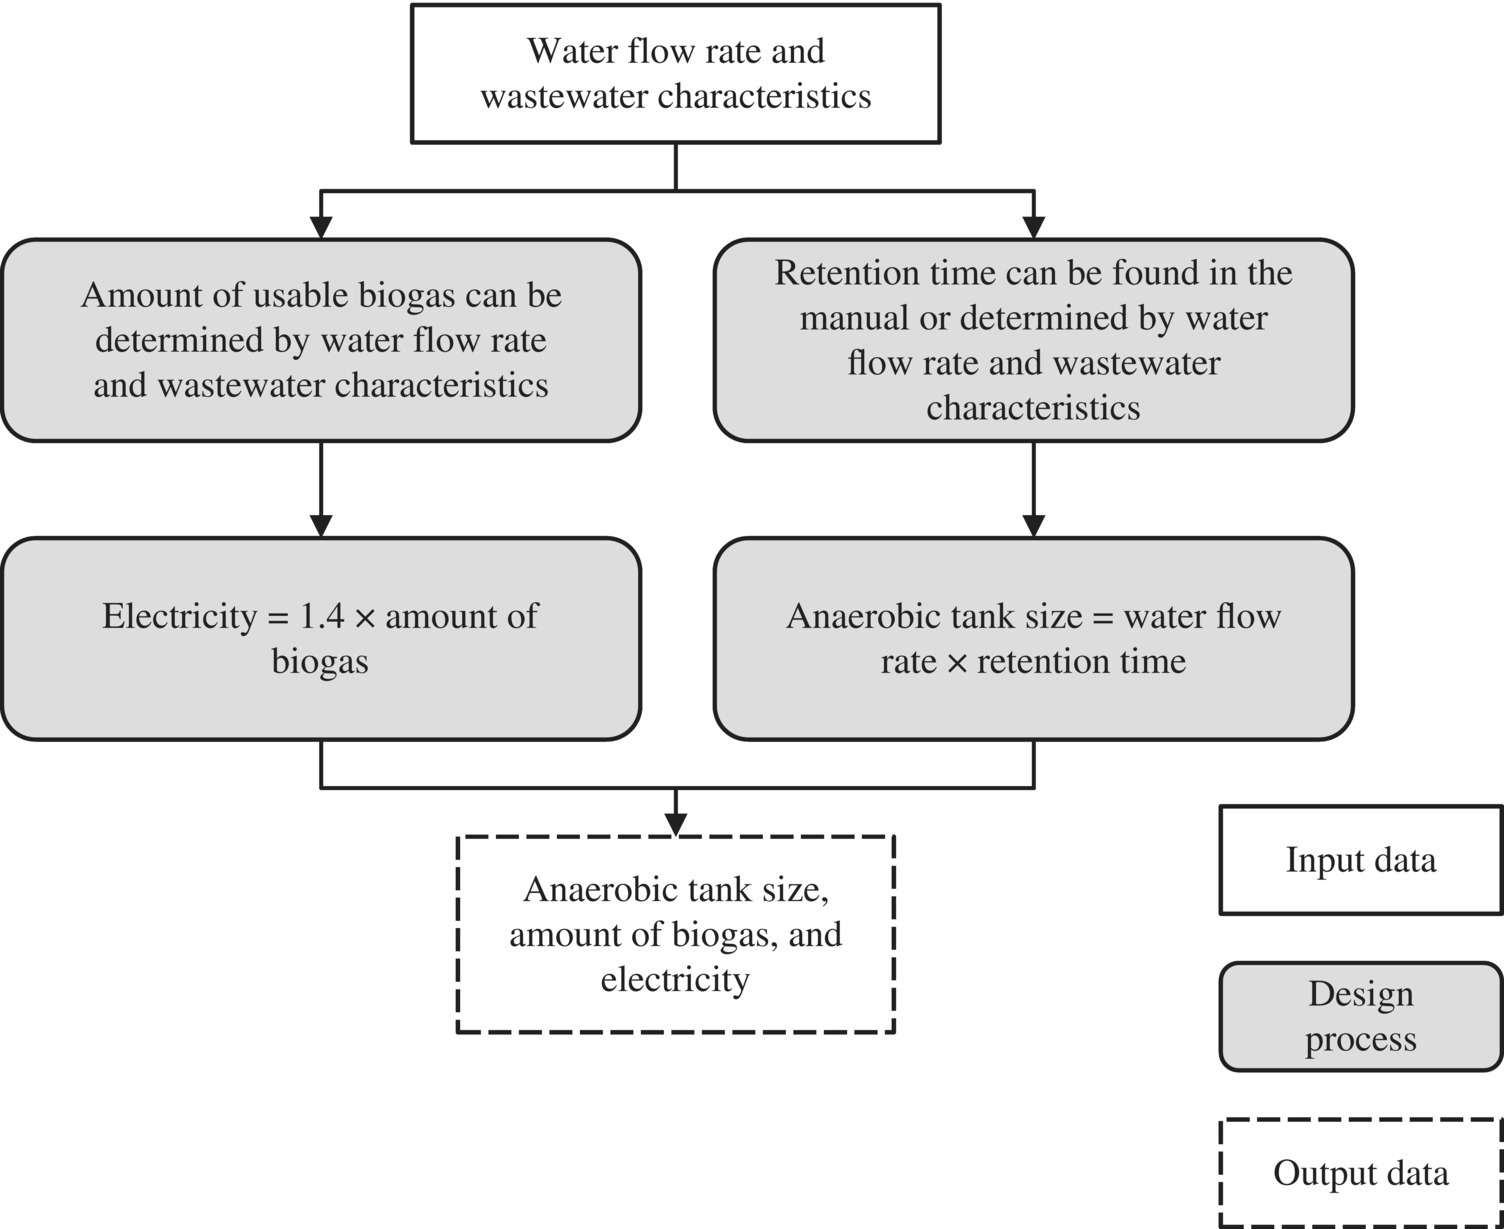 Flowchart for wastewater treatment system starting from “Water flow rate and wastewater characteristics,” with unshaded, shaded, and dashed boxes for input data, design process, and output data, respectively.